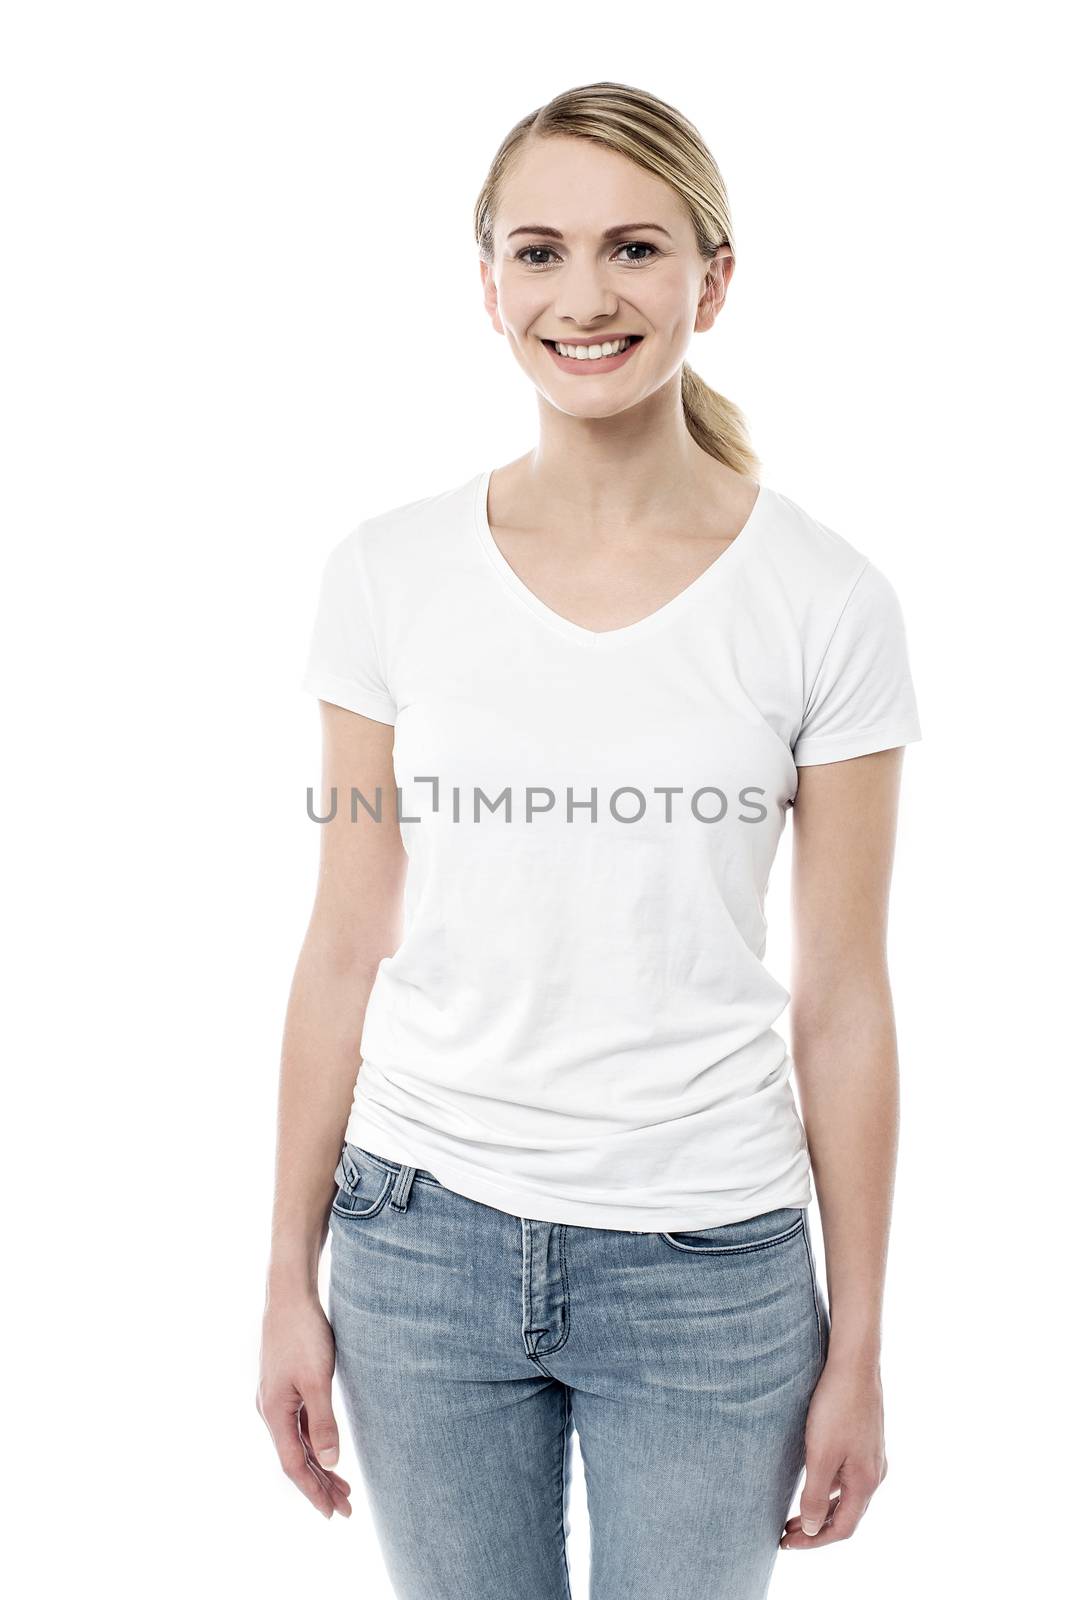 Smiling pretty girl posing to camera by stockyimages